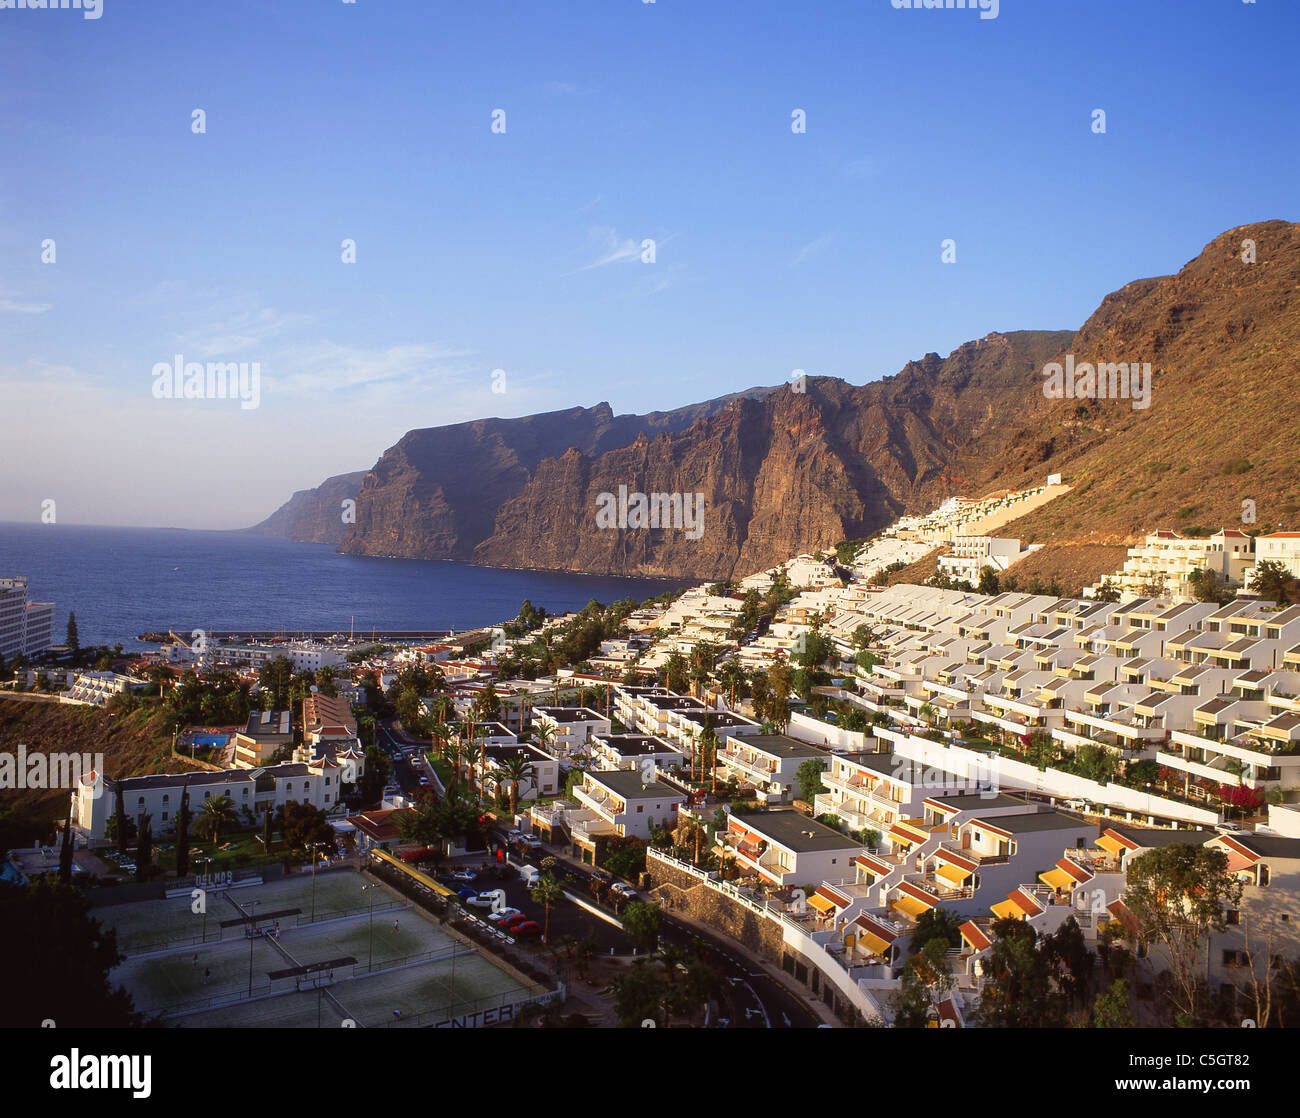 View of resort and cliffs, Los Gigantes, Tenerife, Canary Islands, Spain Stock Photo